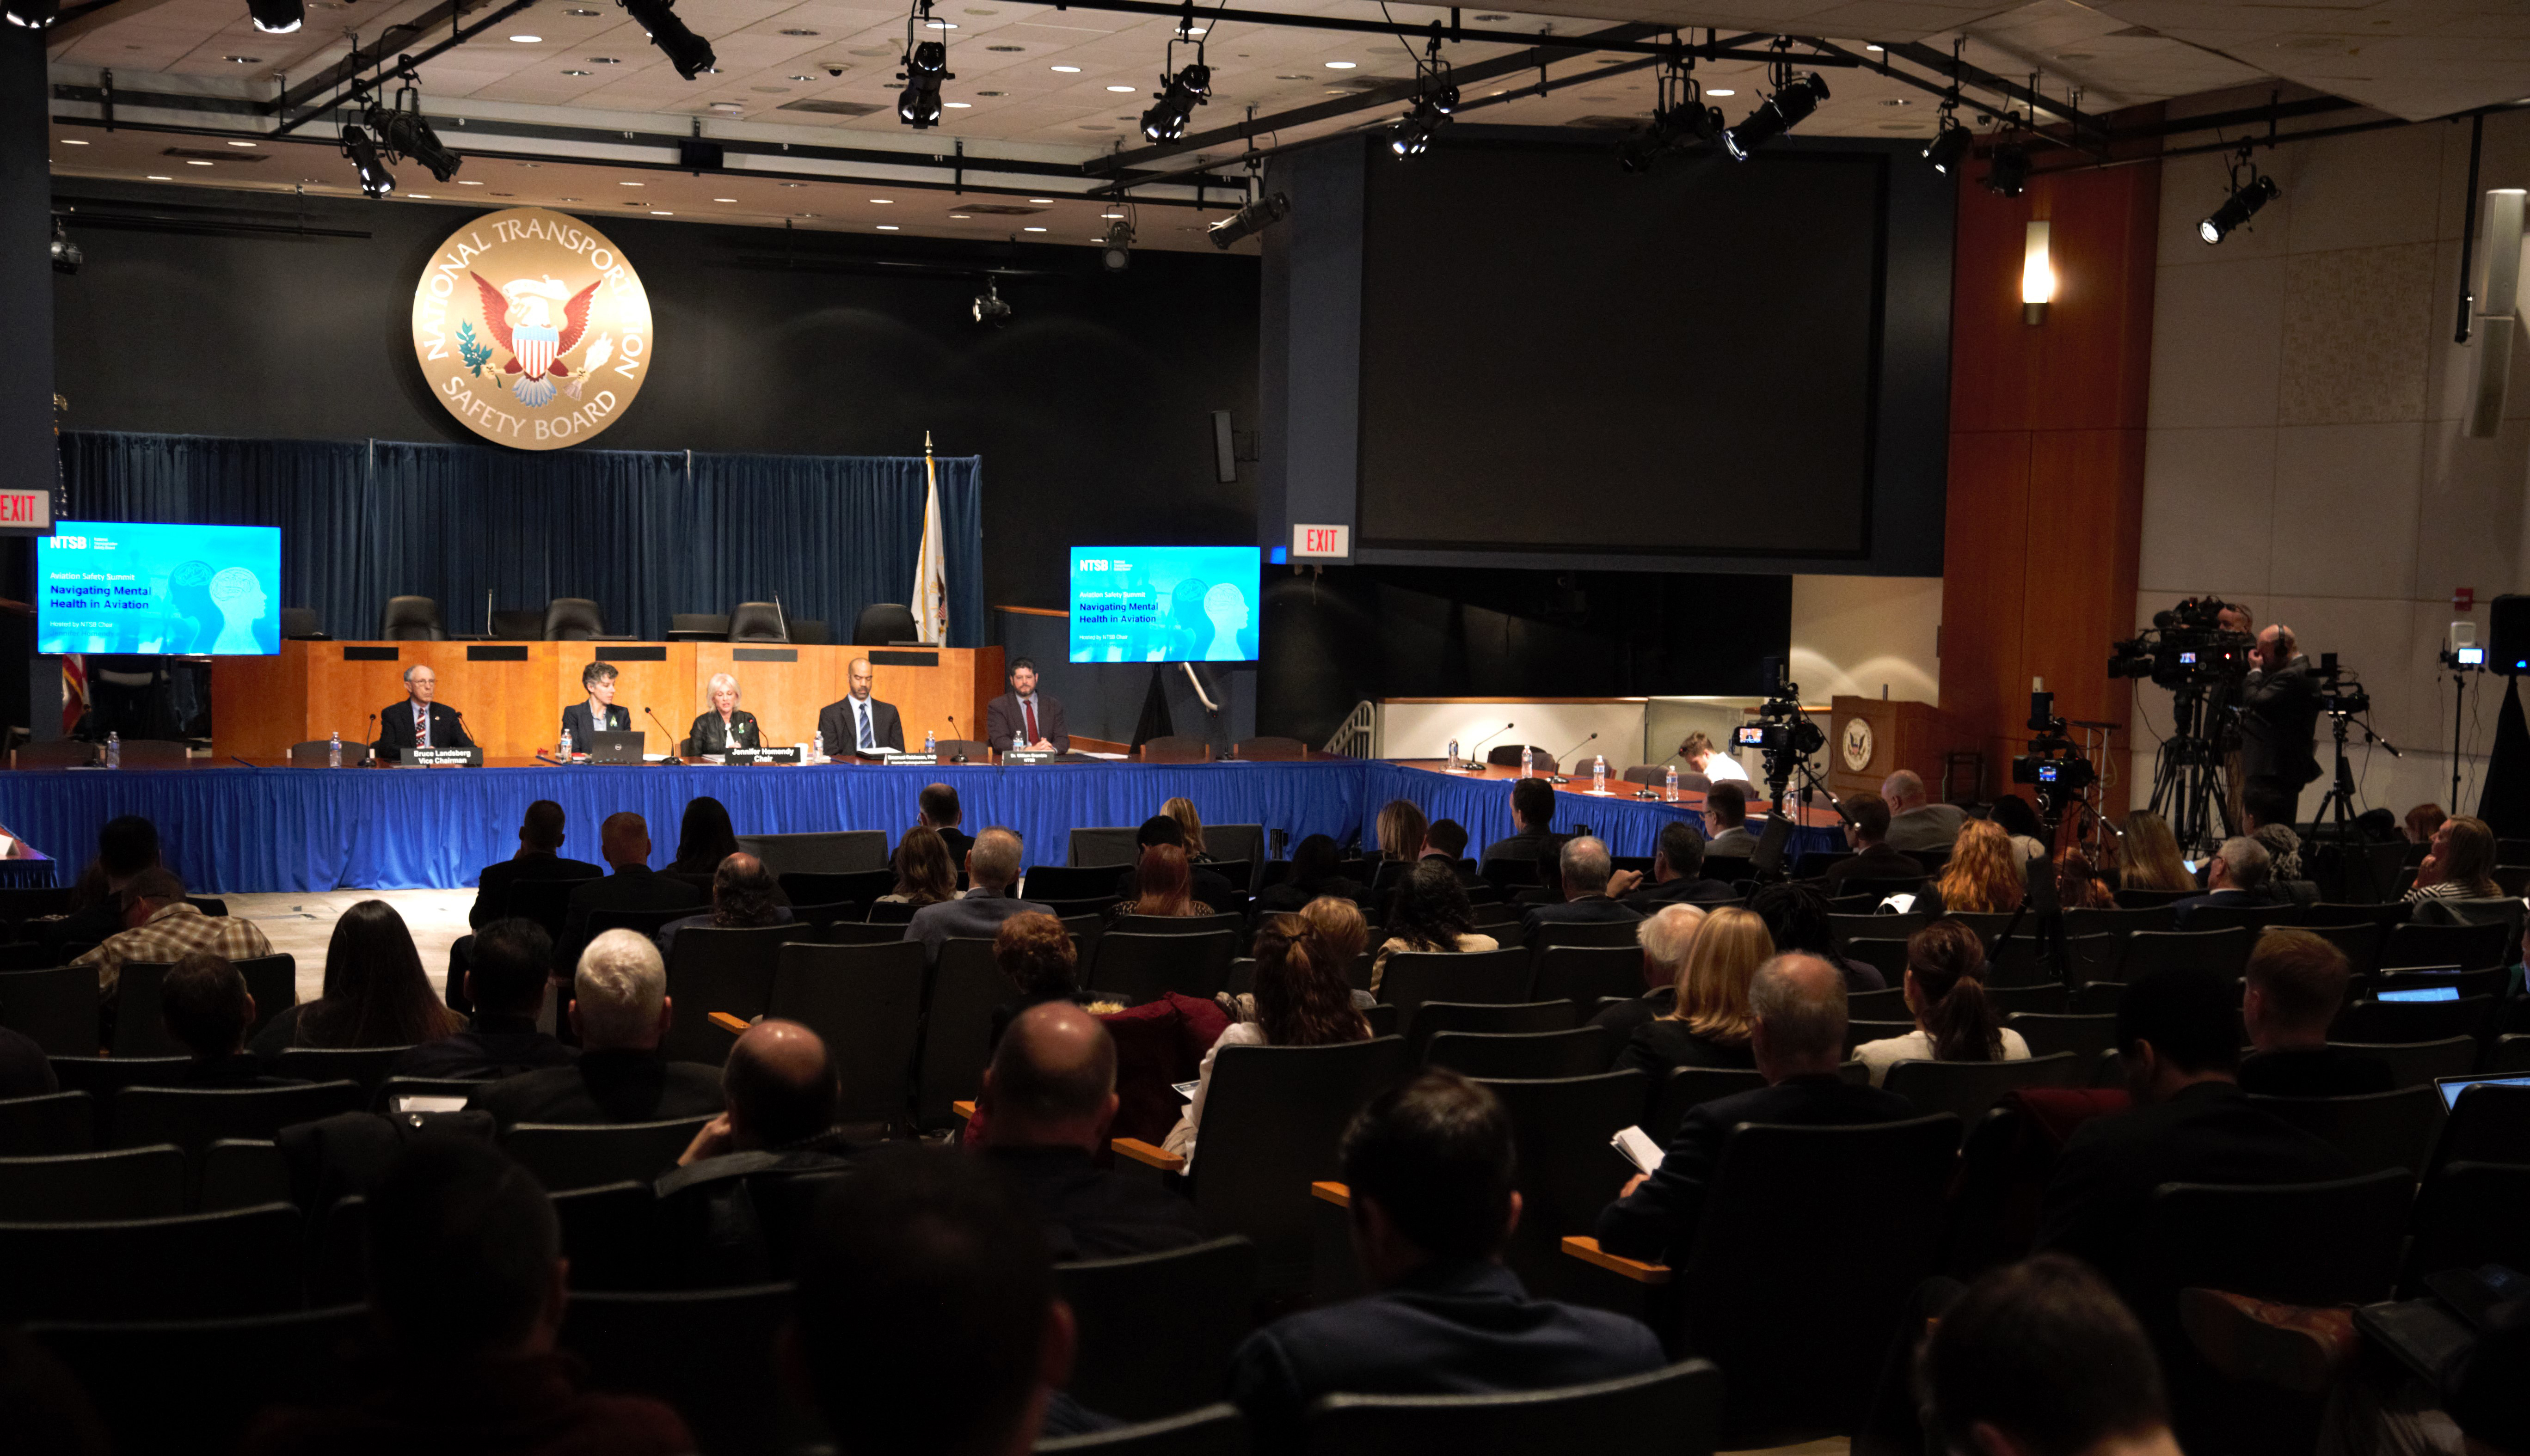 Safety experts, mental health specialists, pilots, government agencies, and aviation industry professionals convened to discuss mental health in the aviation industry at an NTSB safety summit on December 6. NTSB photo.